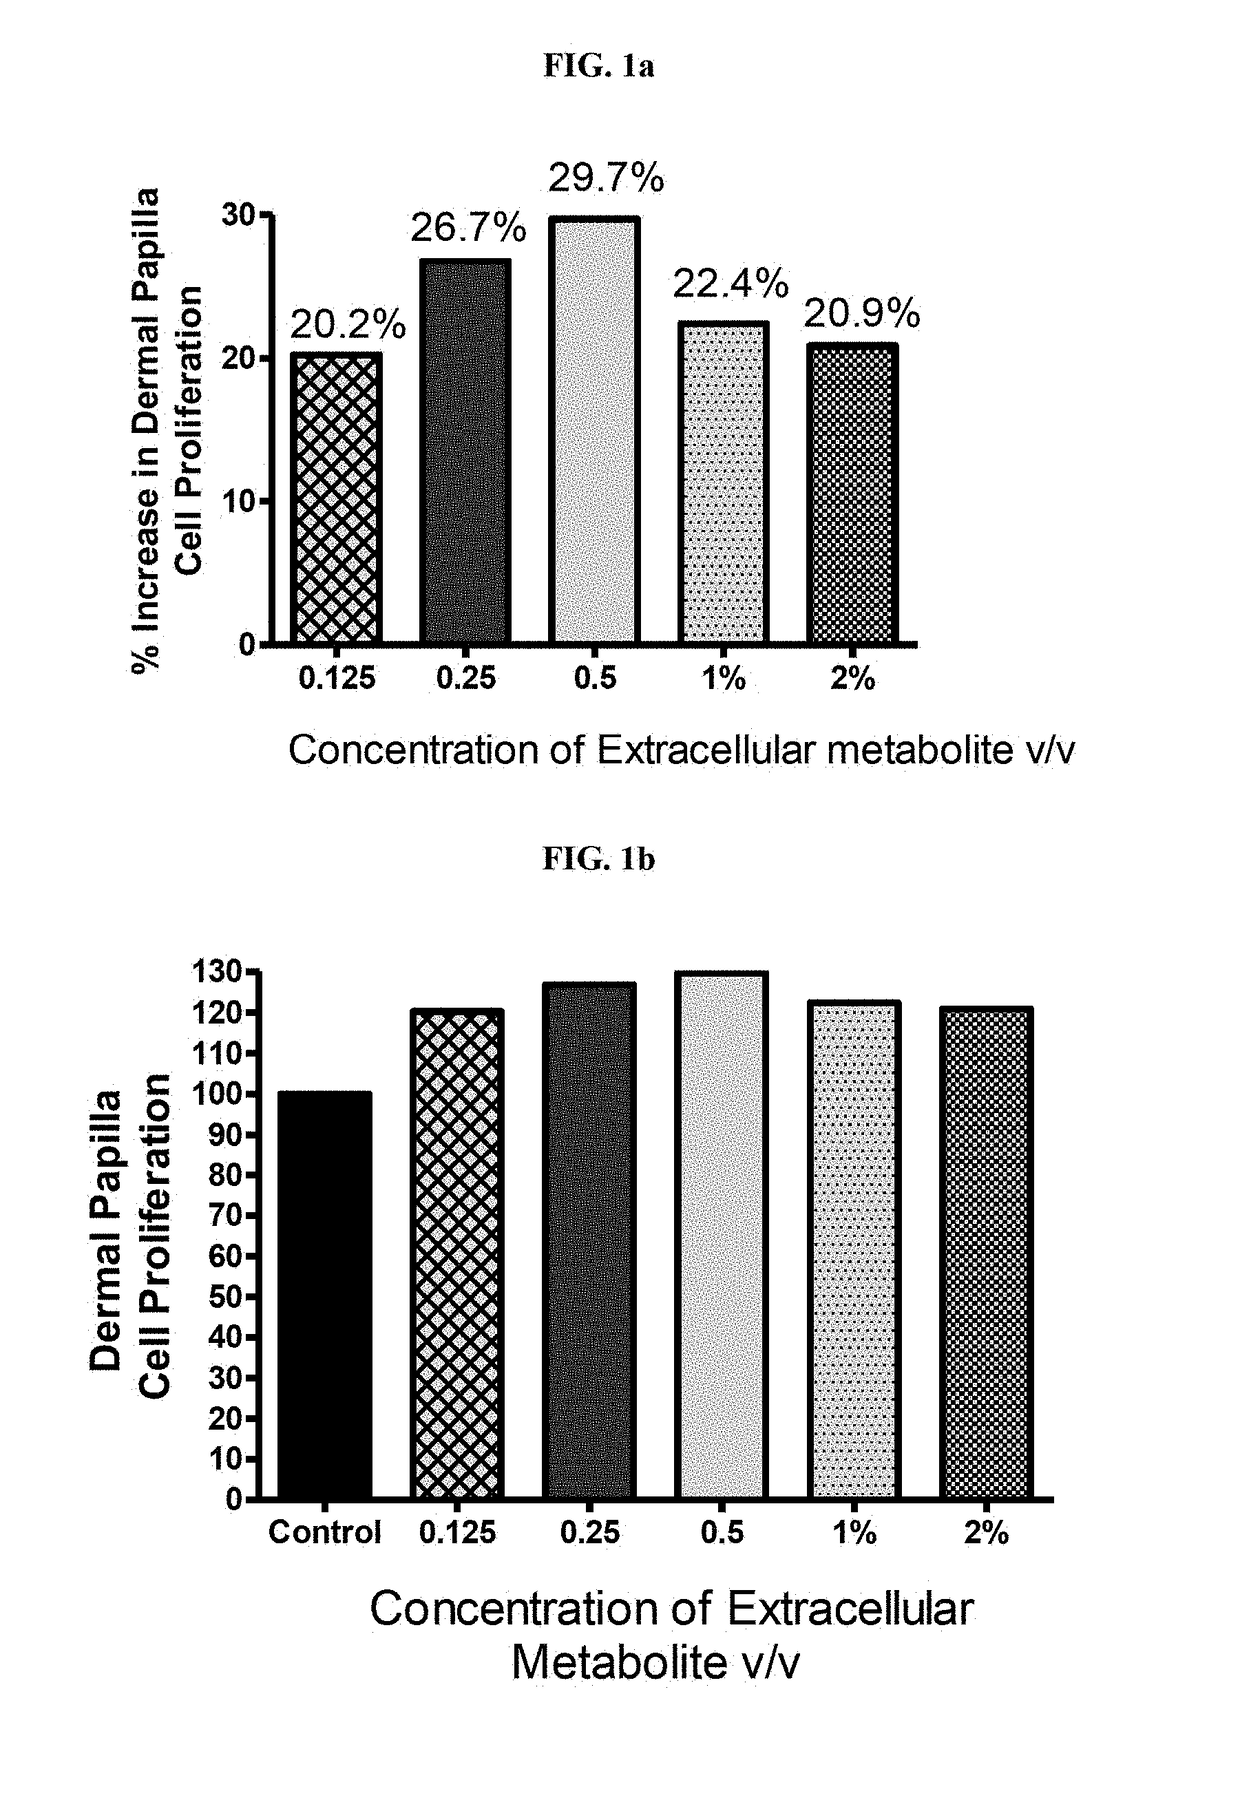 Hair care compositions containing extracellular metabolite preparation from bacillus coagulans